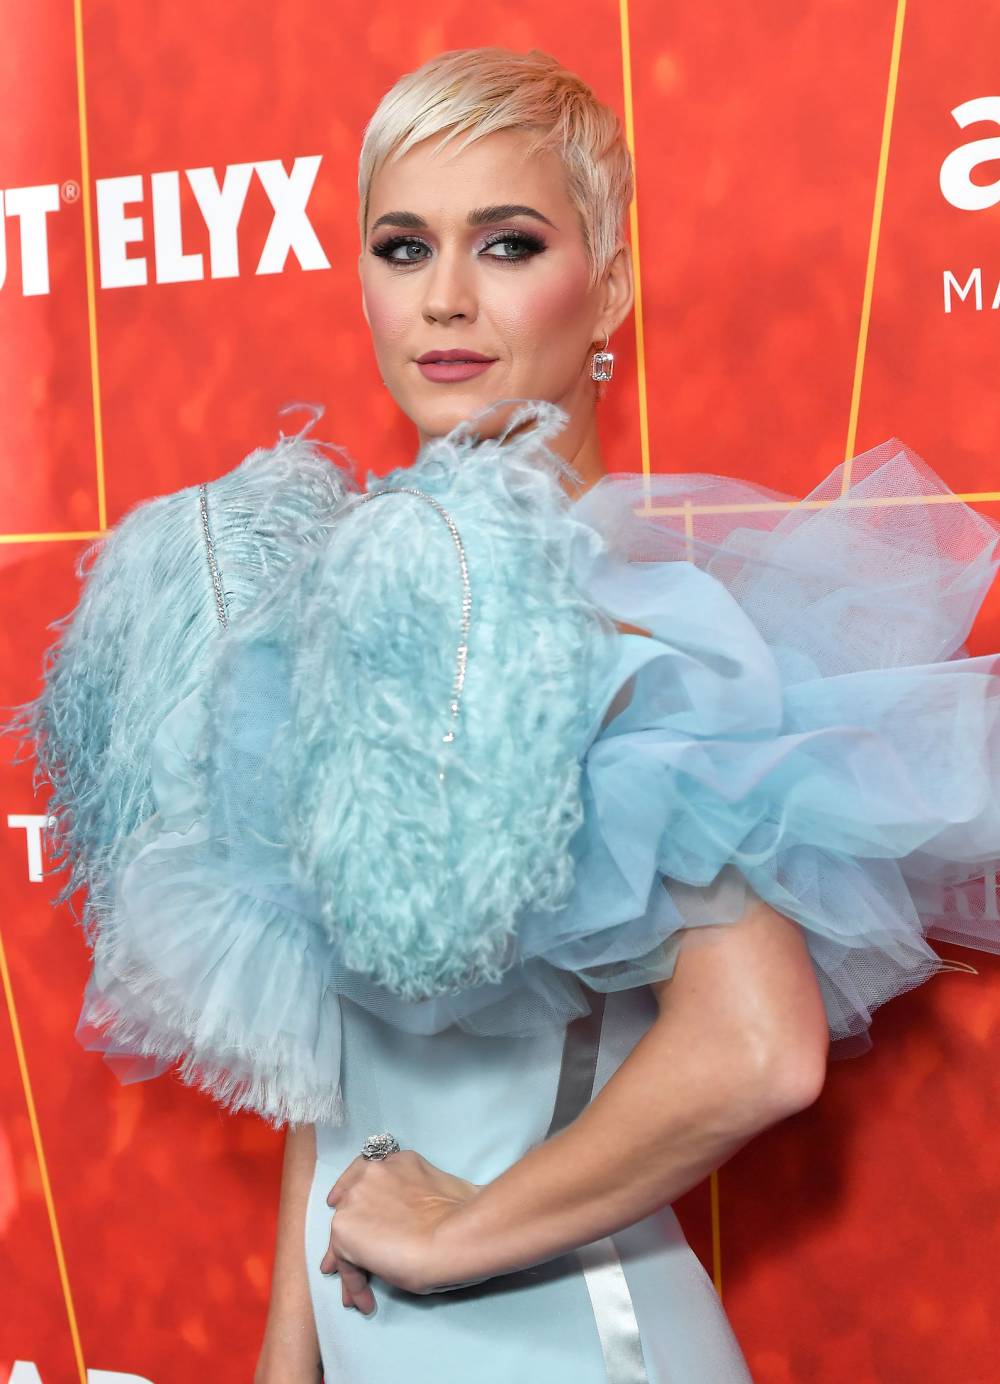 Katy Perry Is Saving Her Most Iconic Clothes for Daughter Daisy